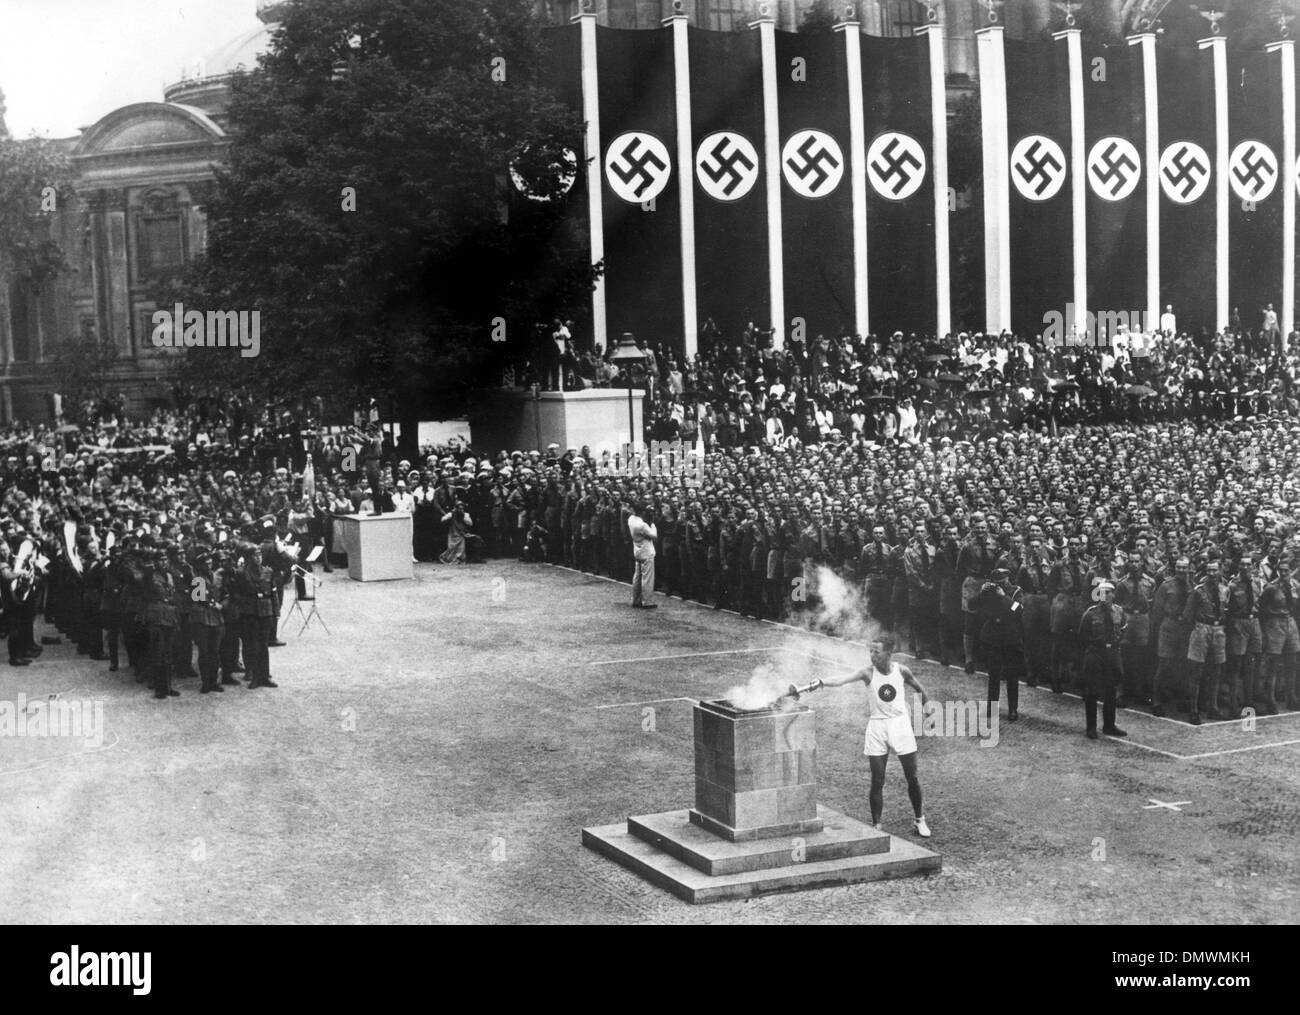 Aug. 2, 1936 - Berlin, Germany - A German athlete lighting the torch at the opening ceremony for the 1936 Berlin Olympics. (Credit Image: © KEYSTONE Pictures USA/ZUMAPRESS.com) Stock Photo